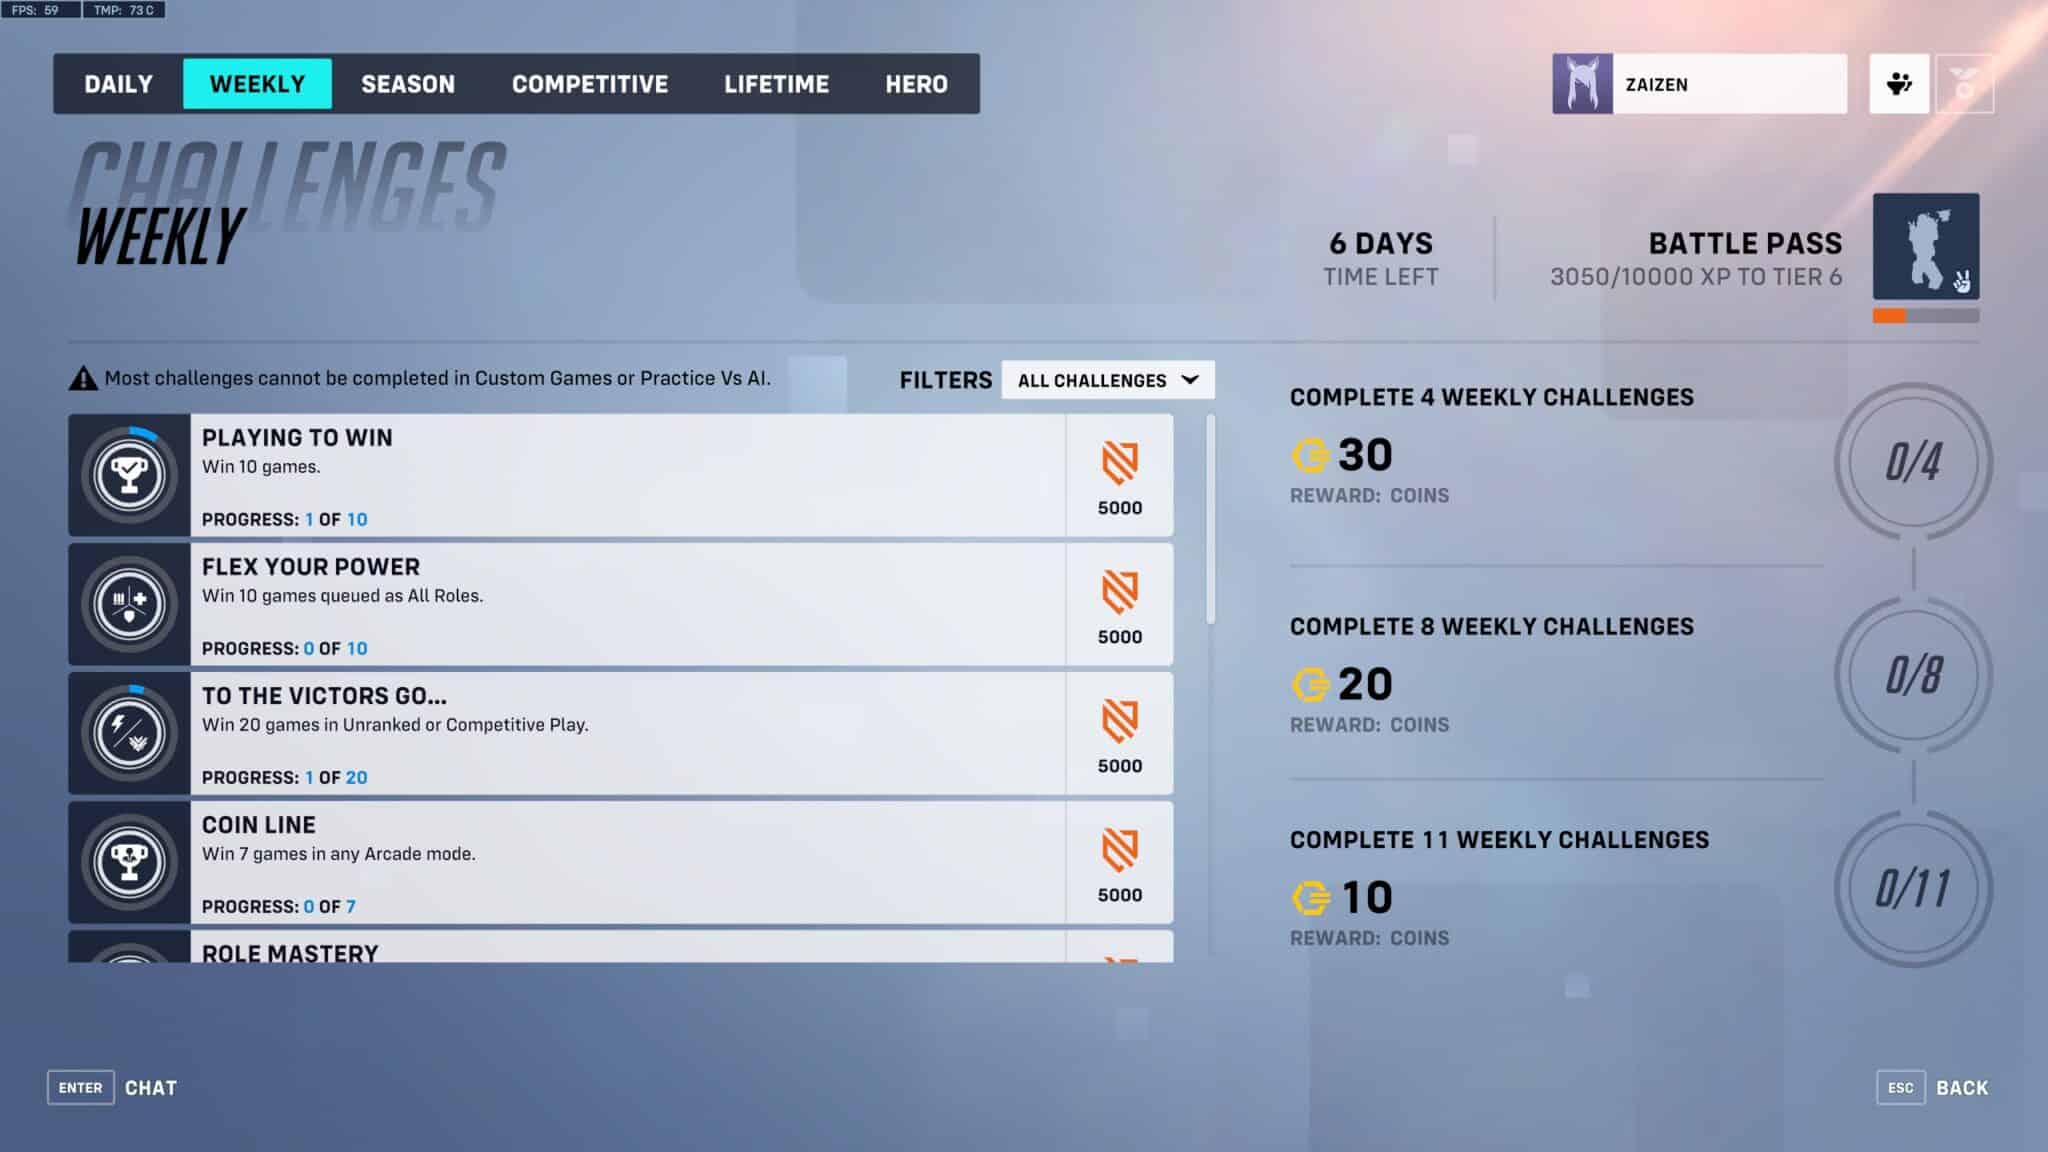 (You can also get Overwatch Coins through weekly challenges. However, only on a small scale.)